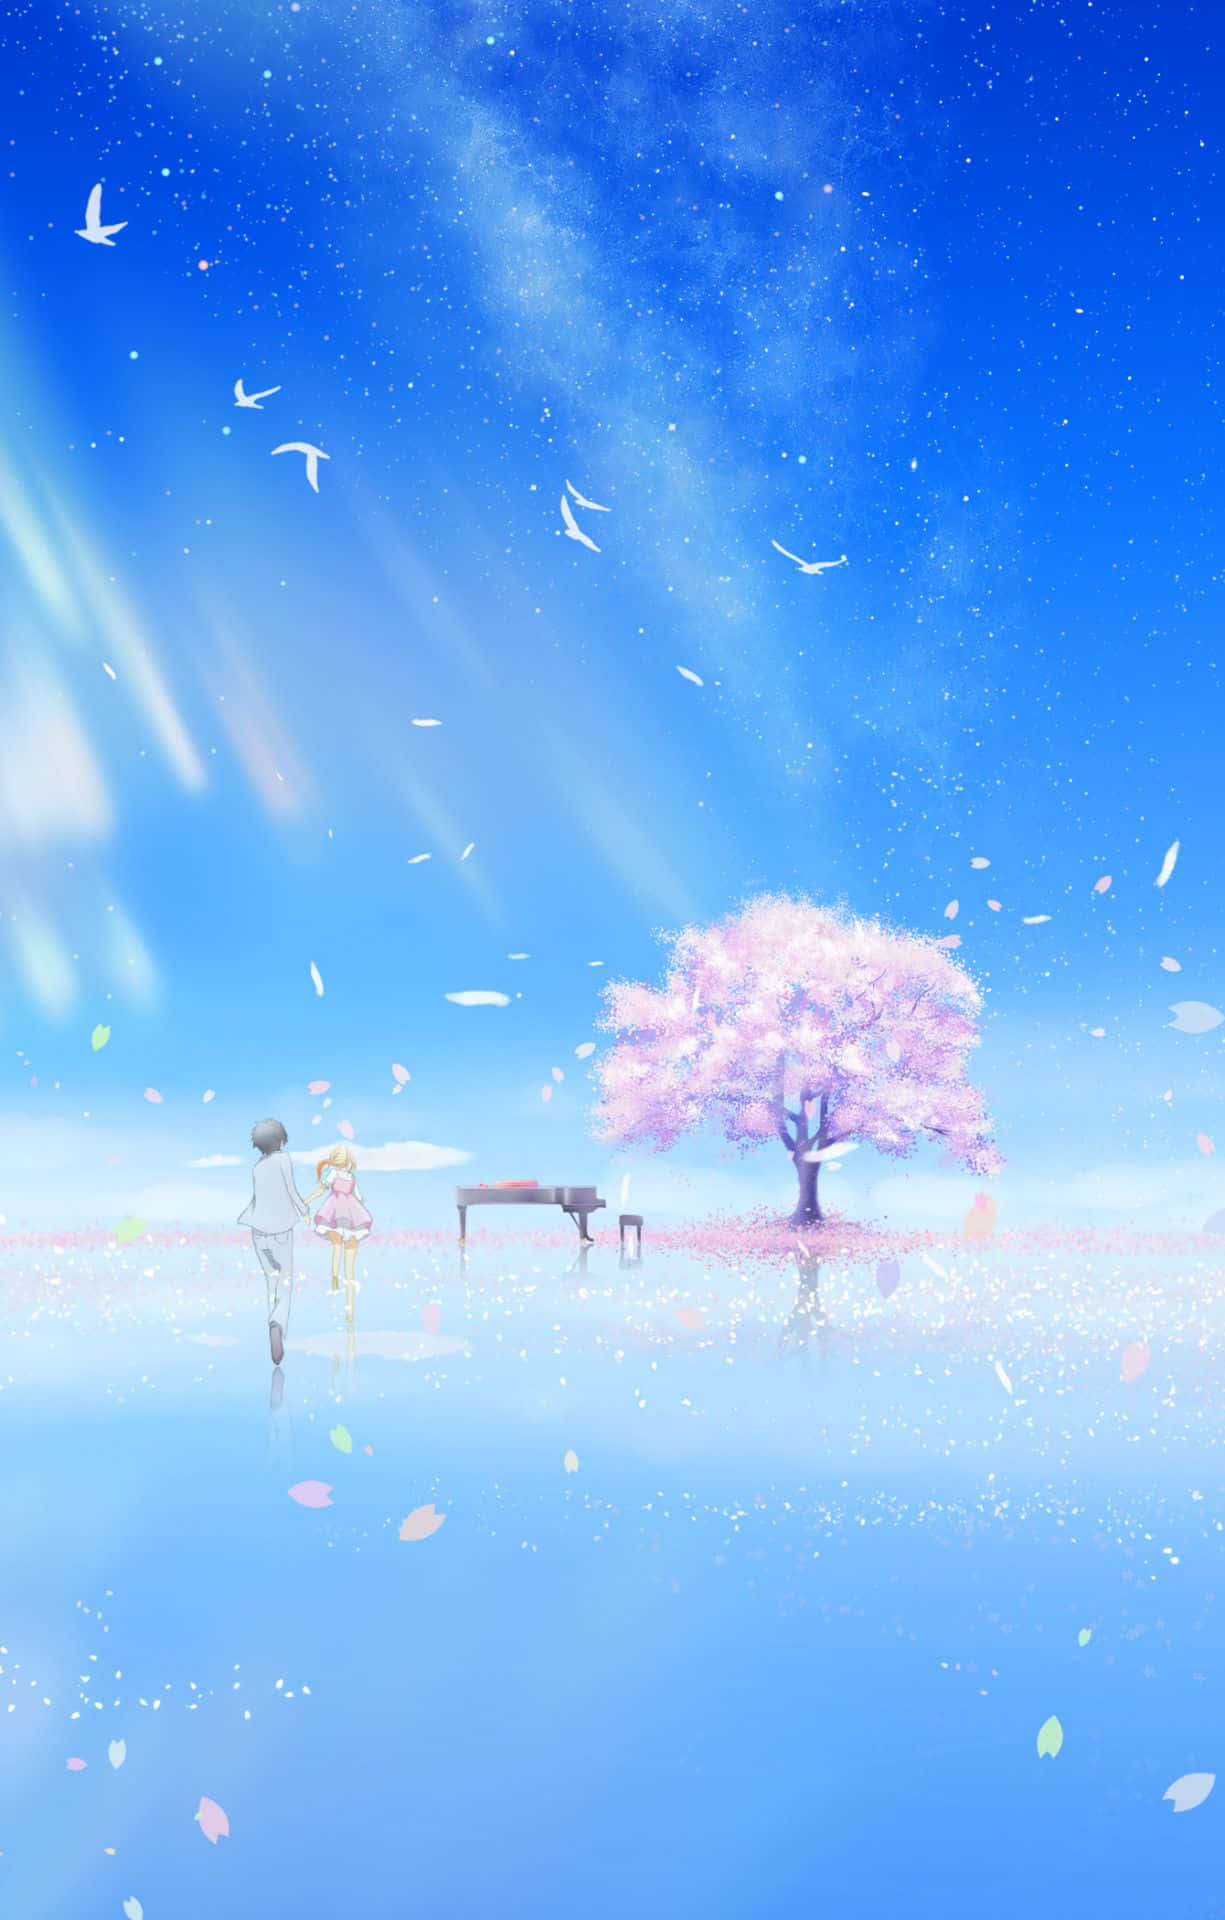 Best Your lie in april iPhone HD phone wallpaper